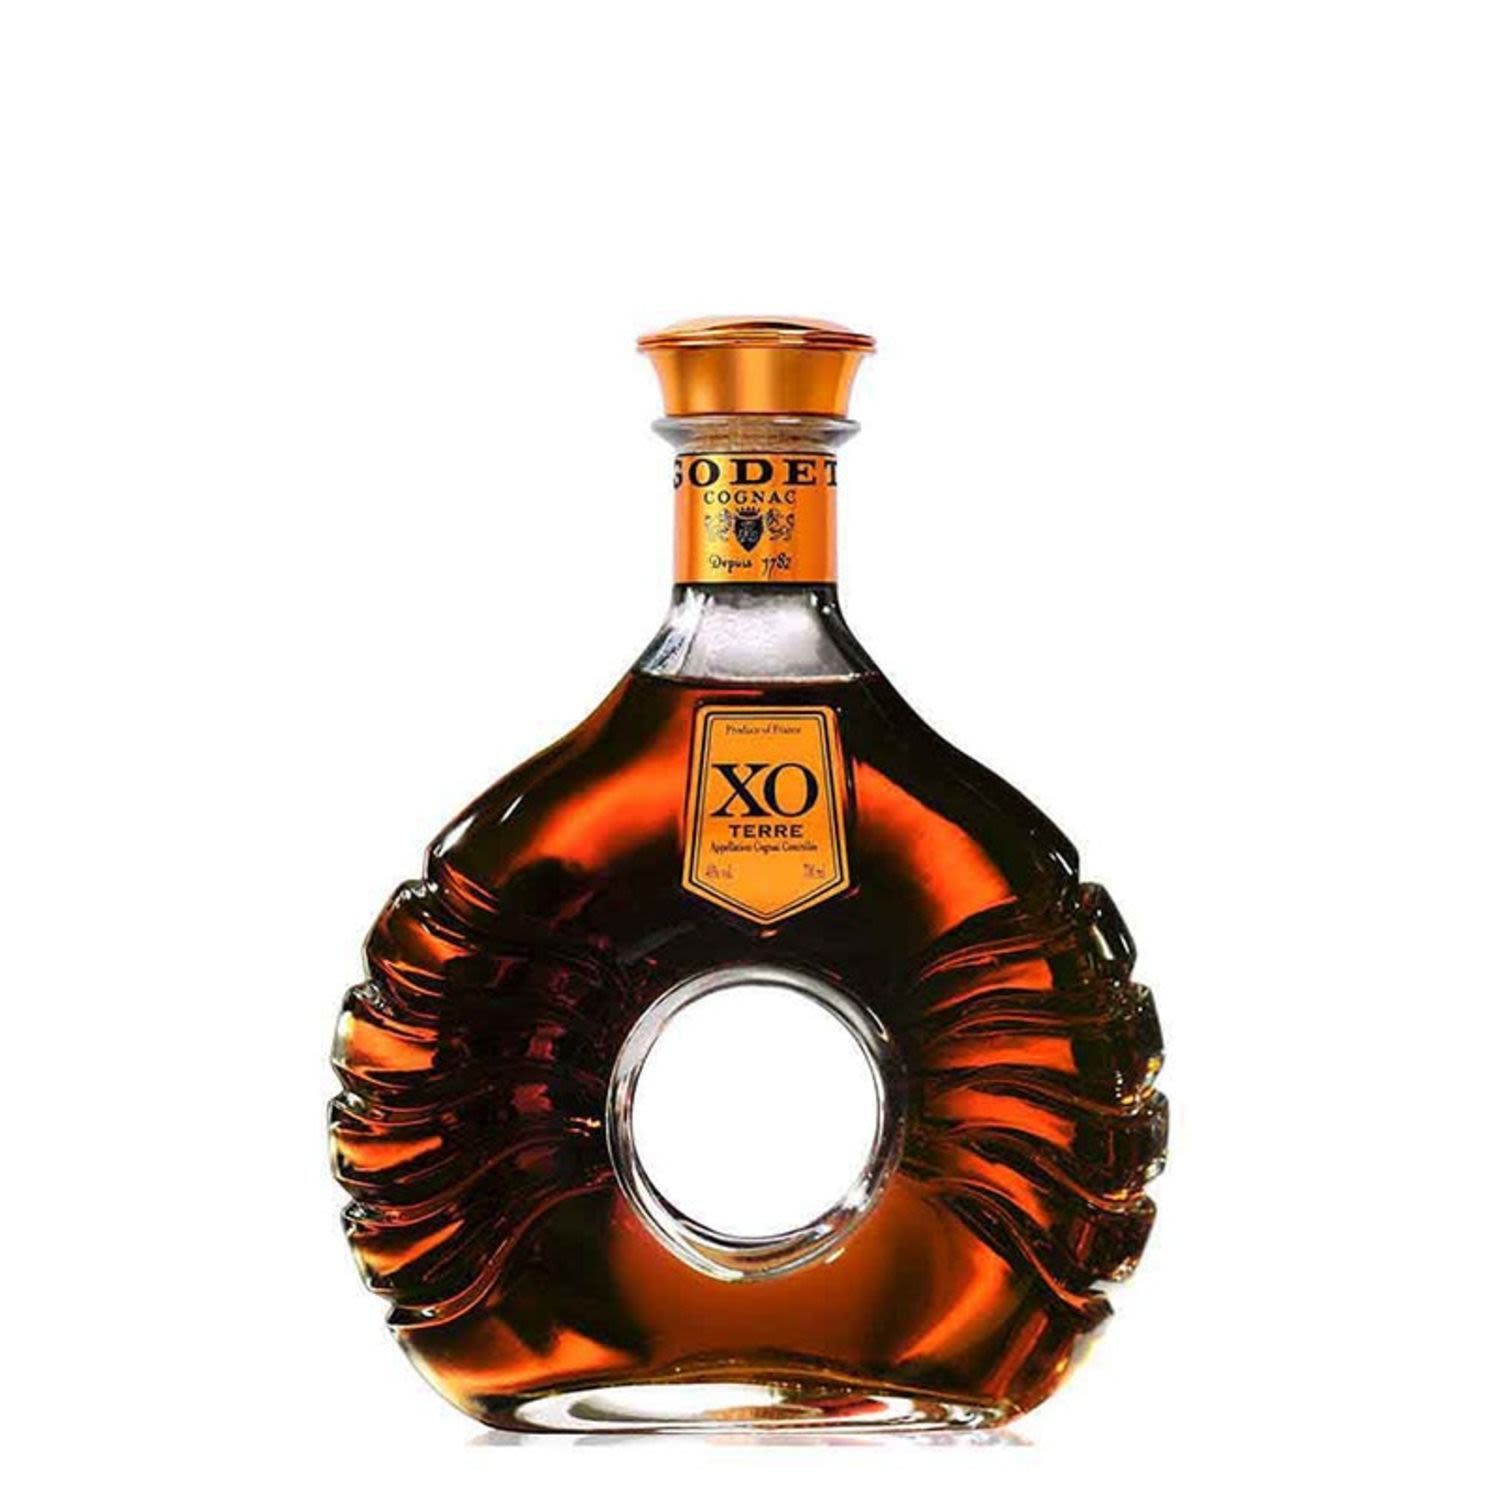 The epitome of excellence, luxury and tradition; Godet XO Terre is truly a masterpiece in its own right. Jean Edouard Godet, the cellar master, selects barrels in order to prevent the wood taking precedence over the fruit and flower of Cognac.<br /> <br />Alcohol Volume: 40.00%<br /><br />Pack Format: Bottle<br /><br />Standard Drinks: 22</br /><br />Pack Type: Bottle<br /><br />Country of Origin: France<br />